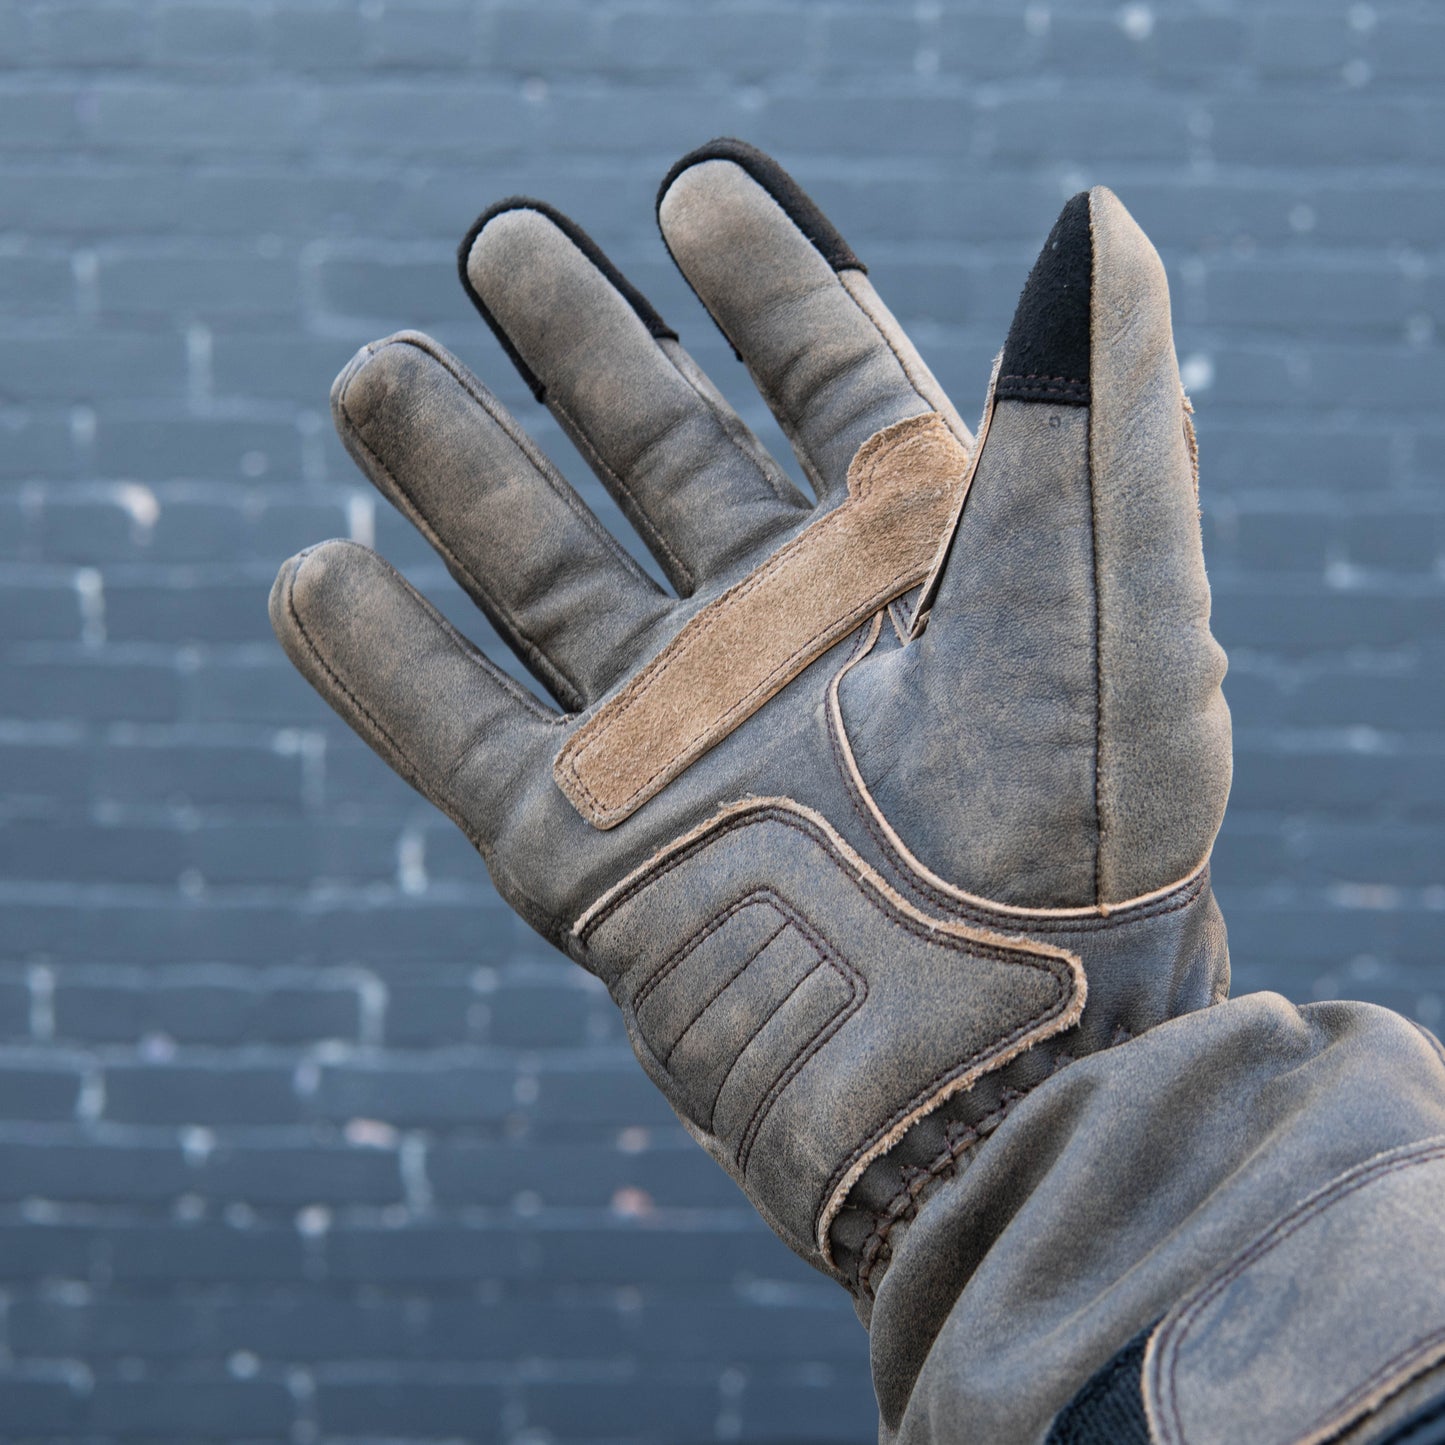 GEN 2 'The Original' Double Length Gauntlet | Extra Long Warm Motorbike Gloves | Retro Brown Distressed Leather